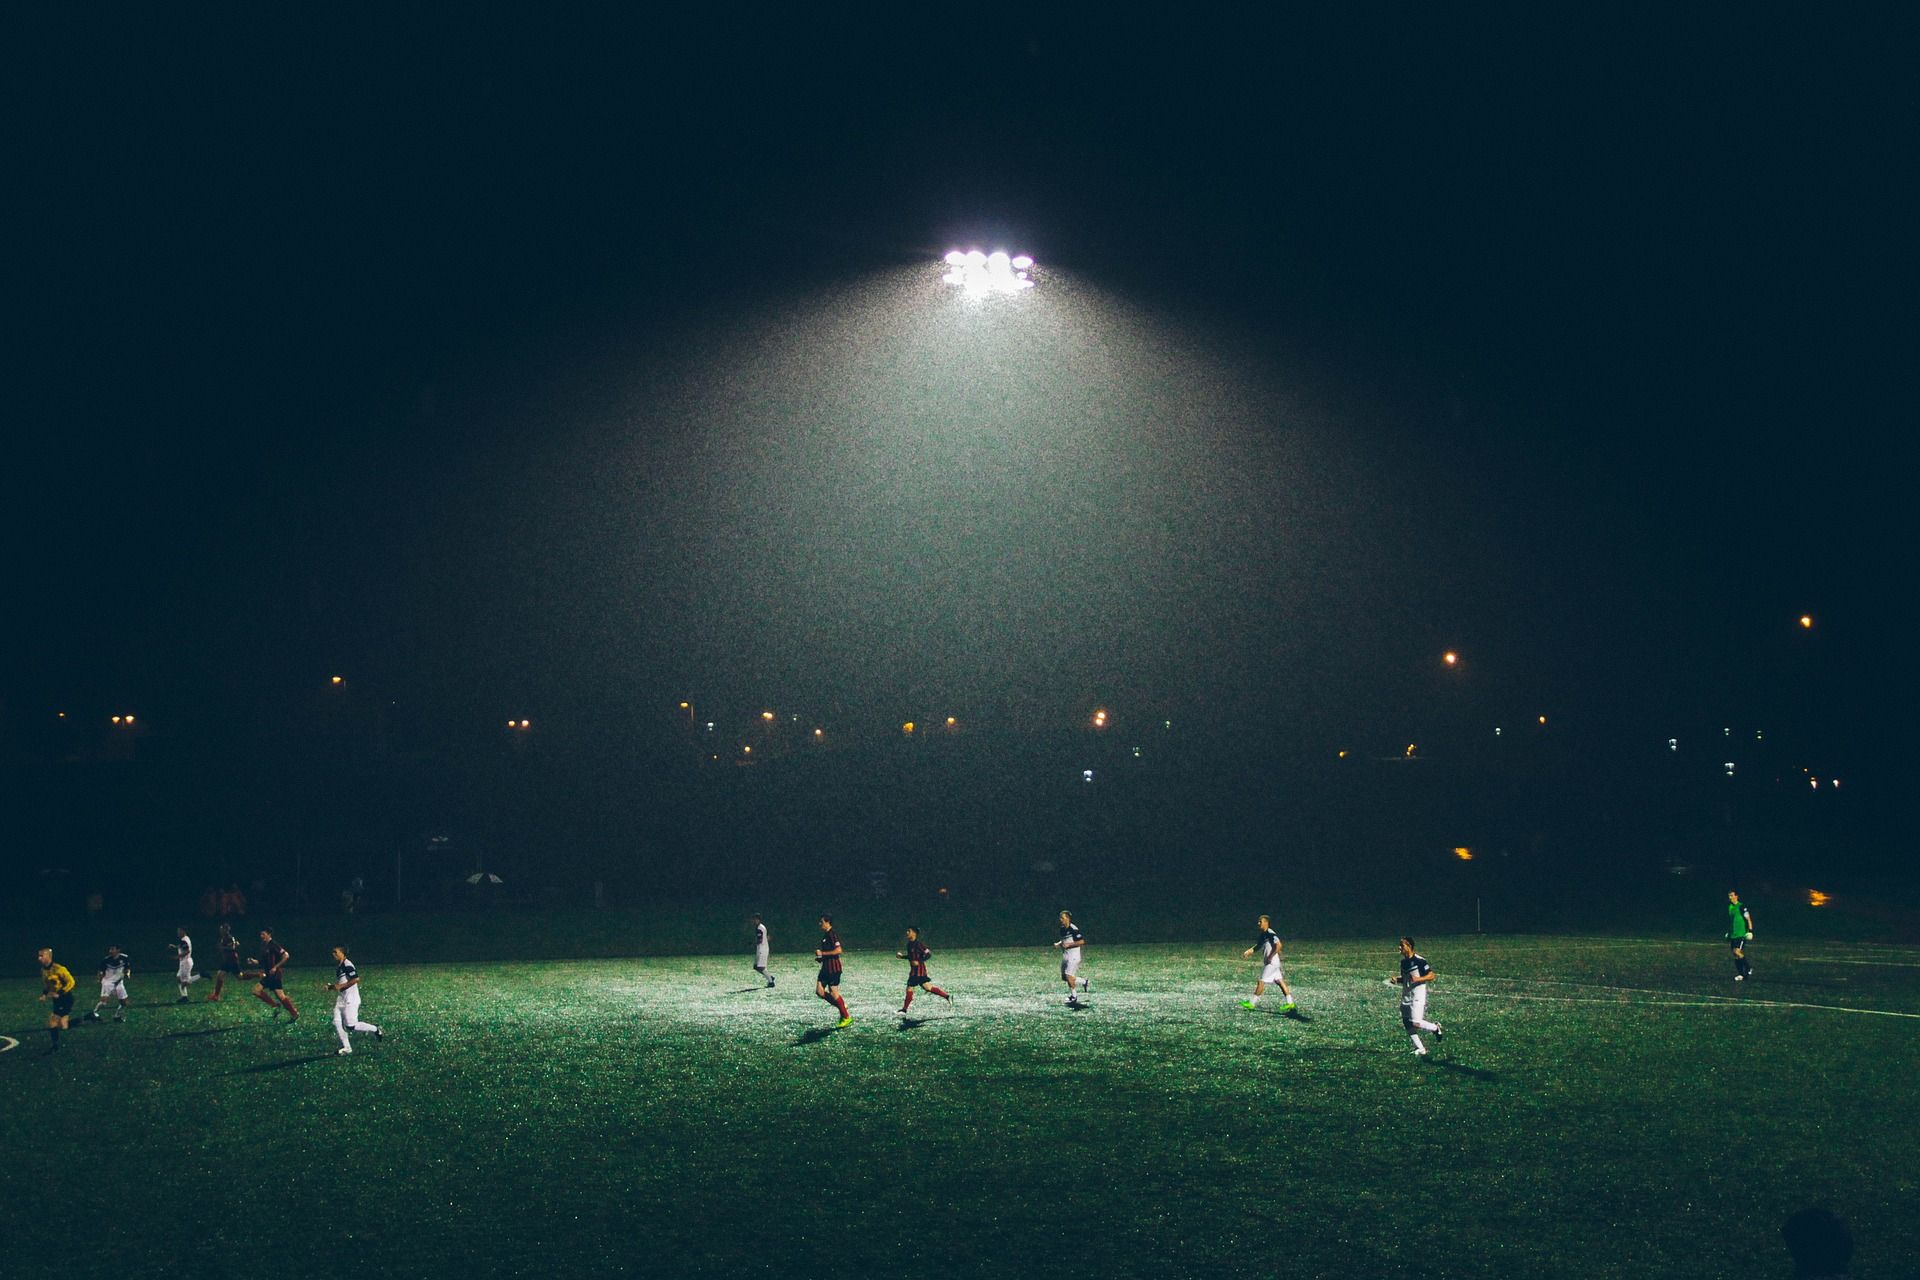 Soccer players on a field at night